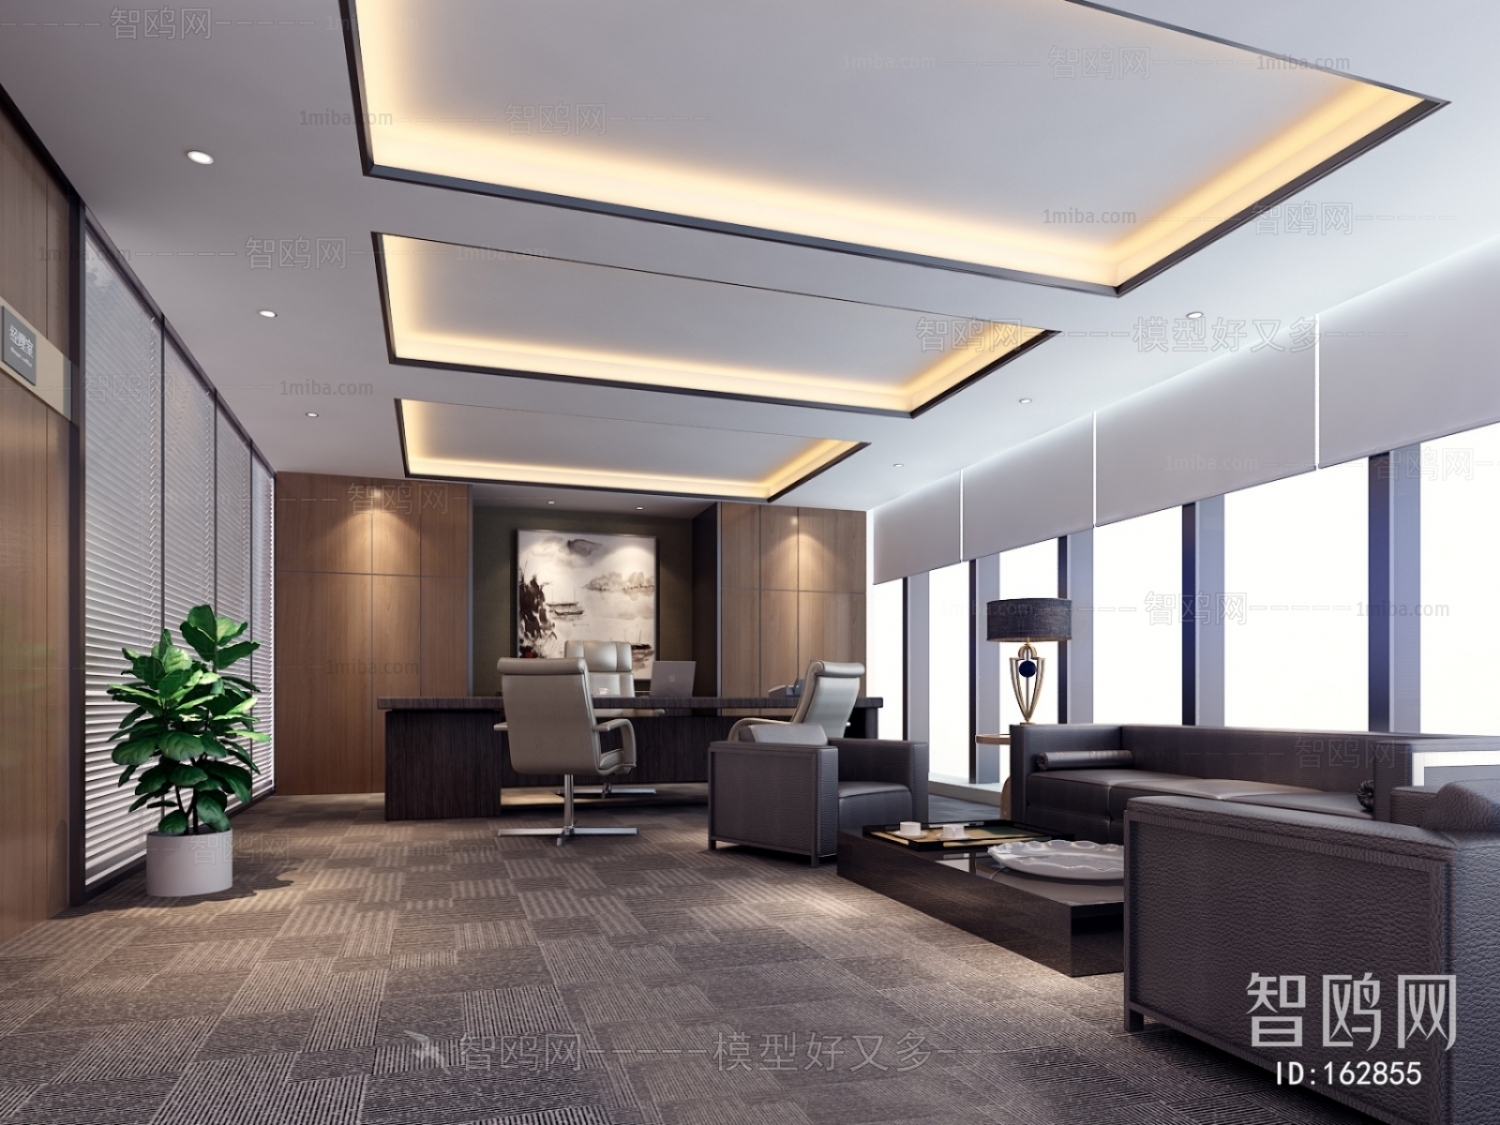 Modern Manager's Office 3D Model Free Download - Model ID.851815185 | 1miba